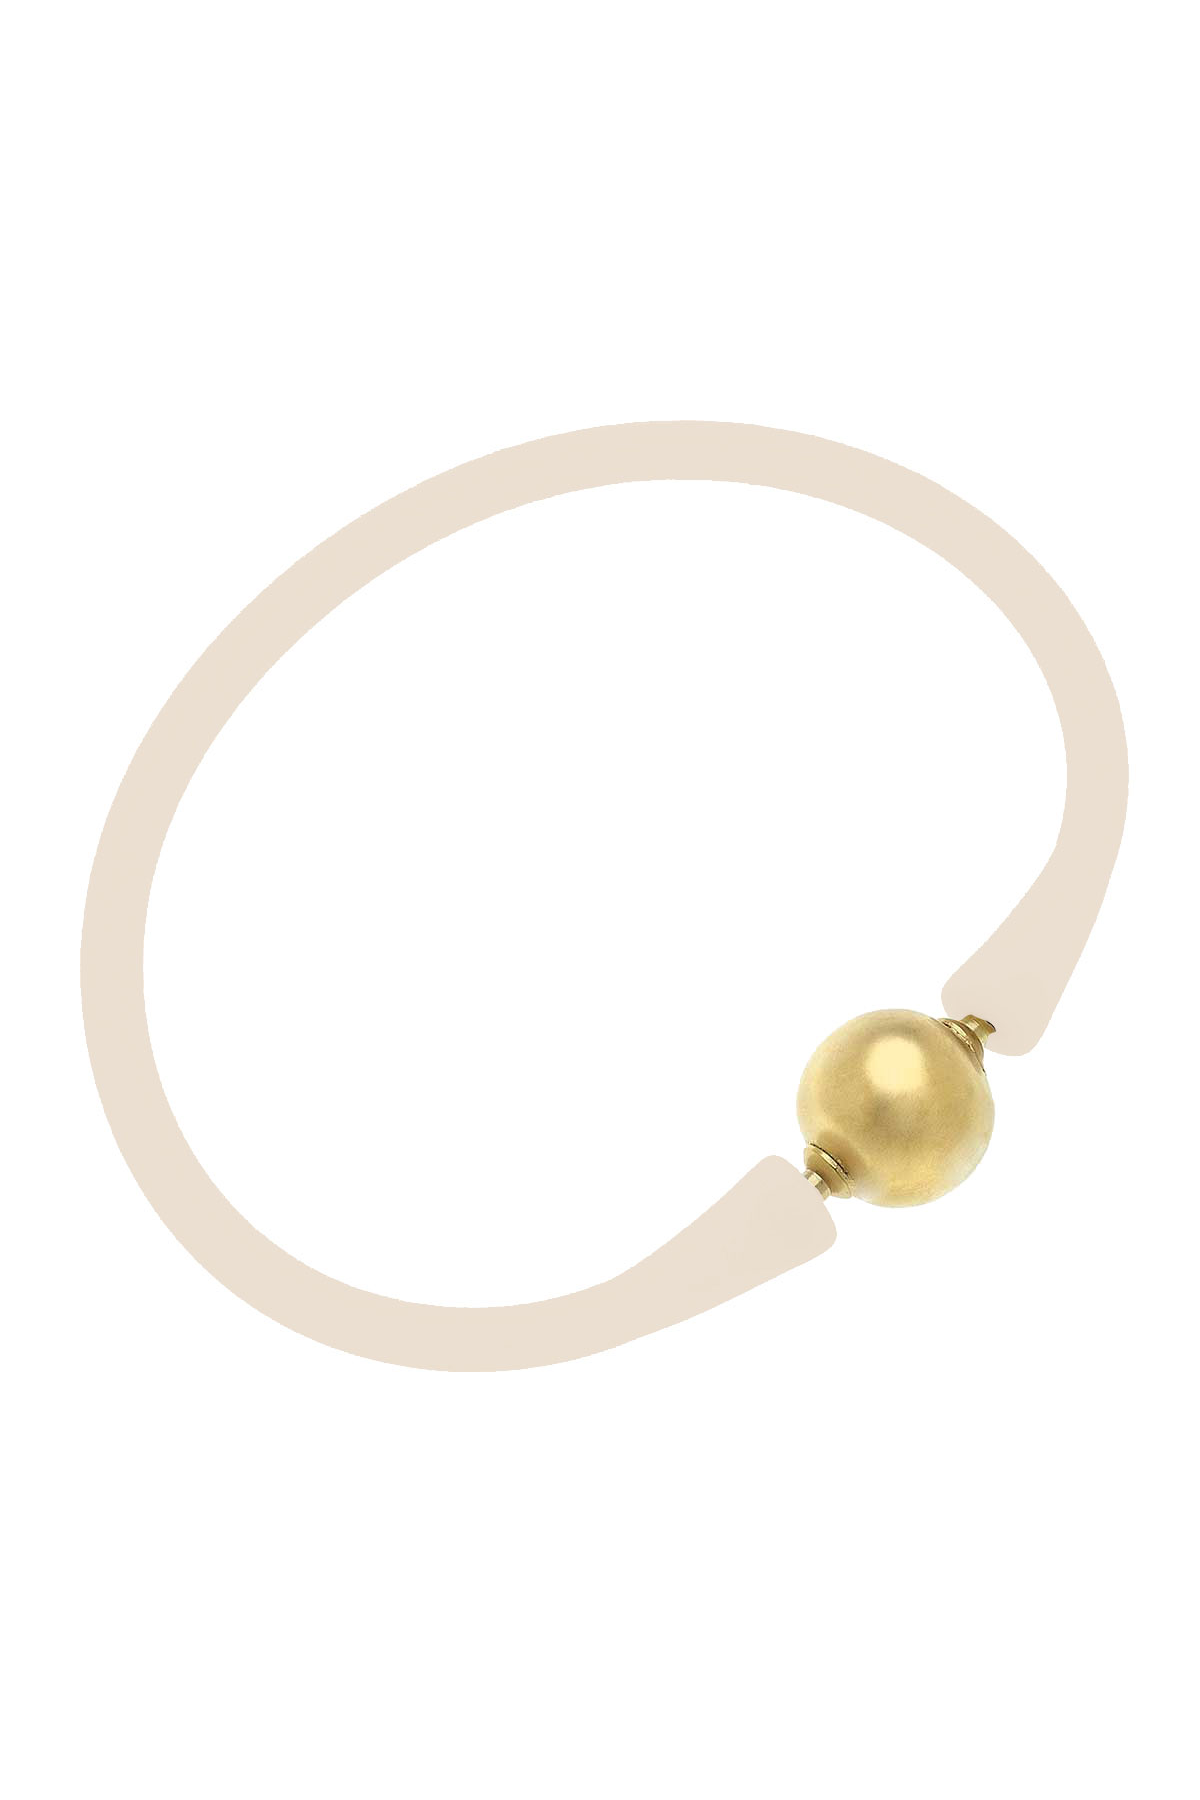 Bali 24K Gold Plated Ball Bead Silicone Bracelet in Eggnog